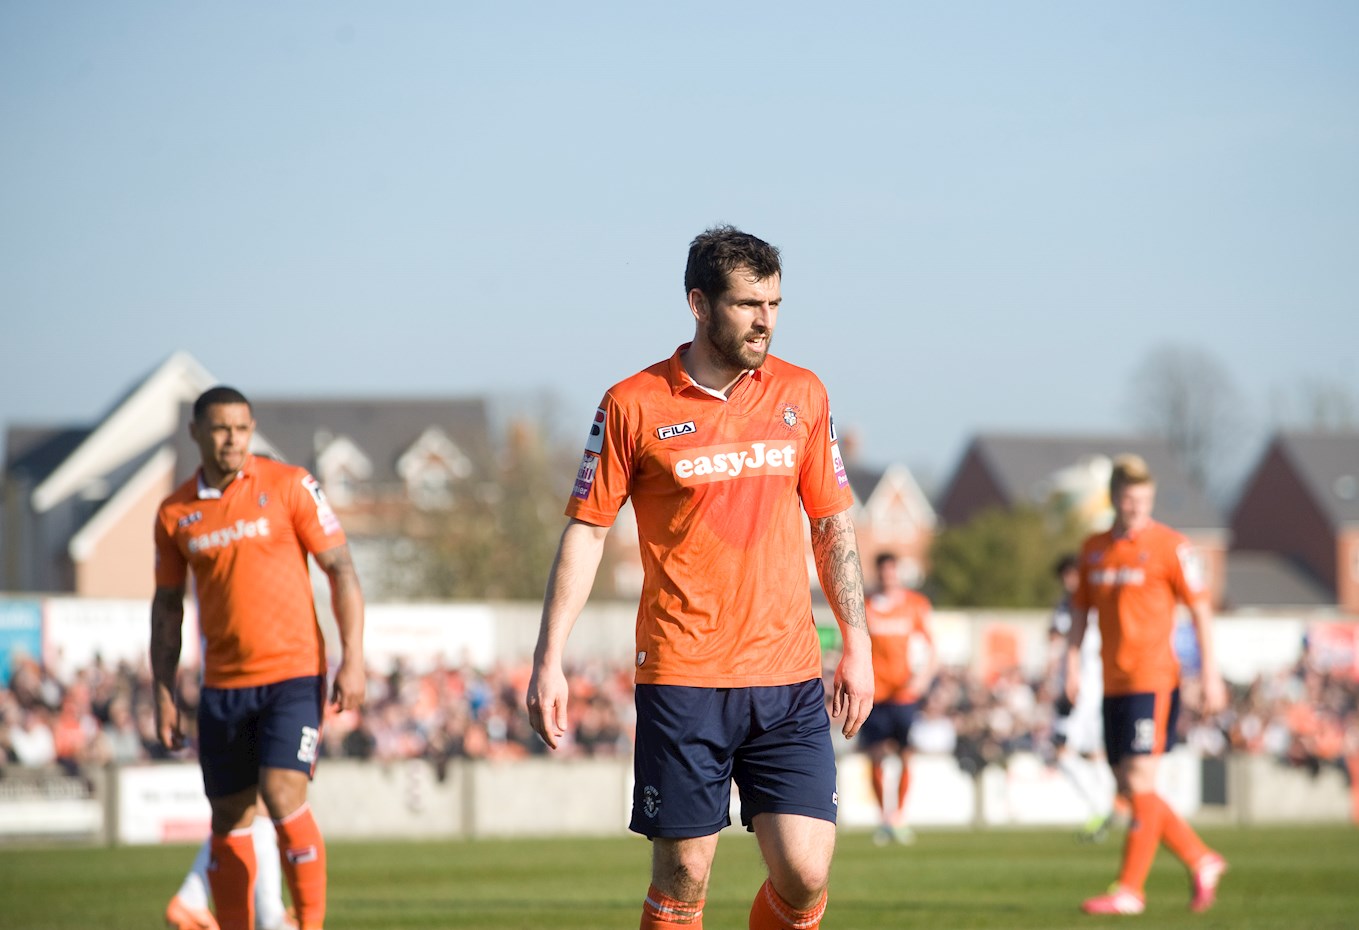 P1144 Alex Lawless surveying the pitch.jpg